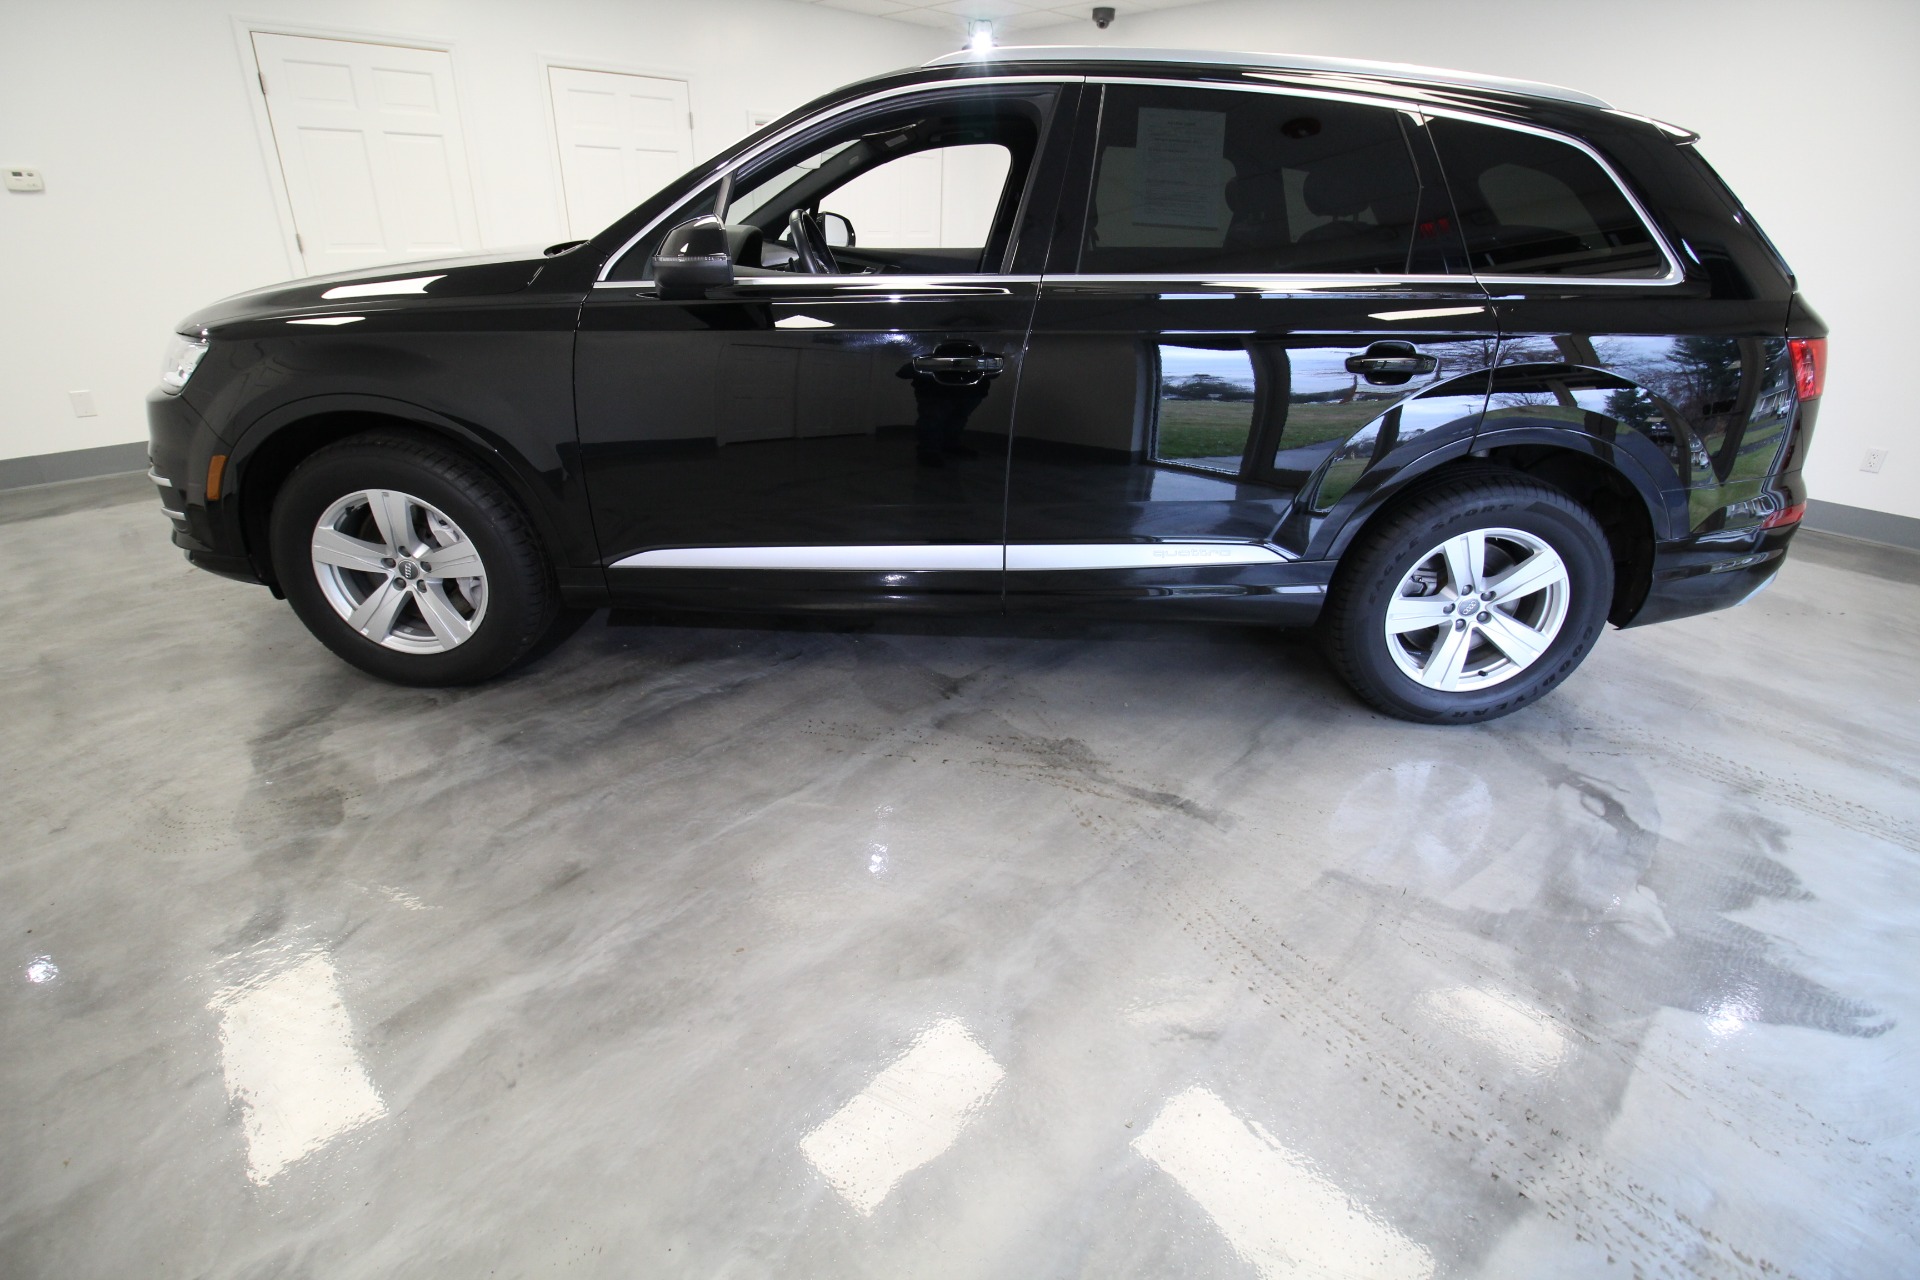 Used 2019 BLACK Audi Q7 2.0 PREMIUM QUATTRO LOADED W/OPTIONS NAVIGATION BLIND SPOT AND MORE | Albany, NY